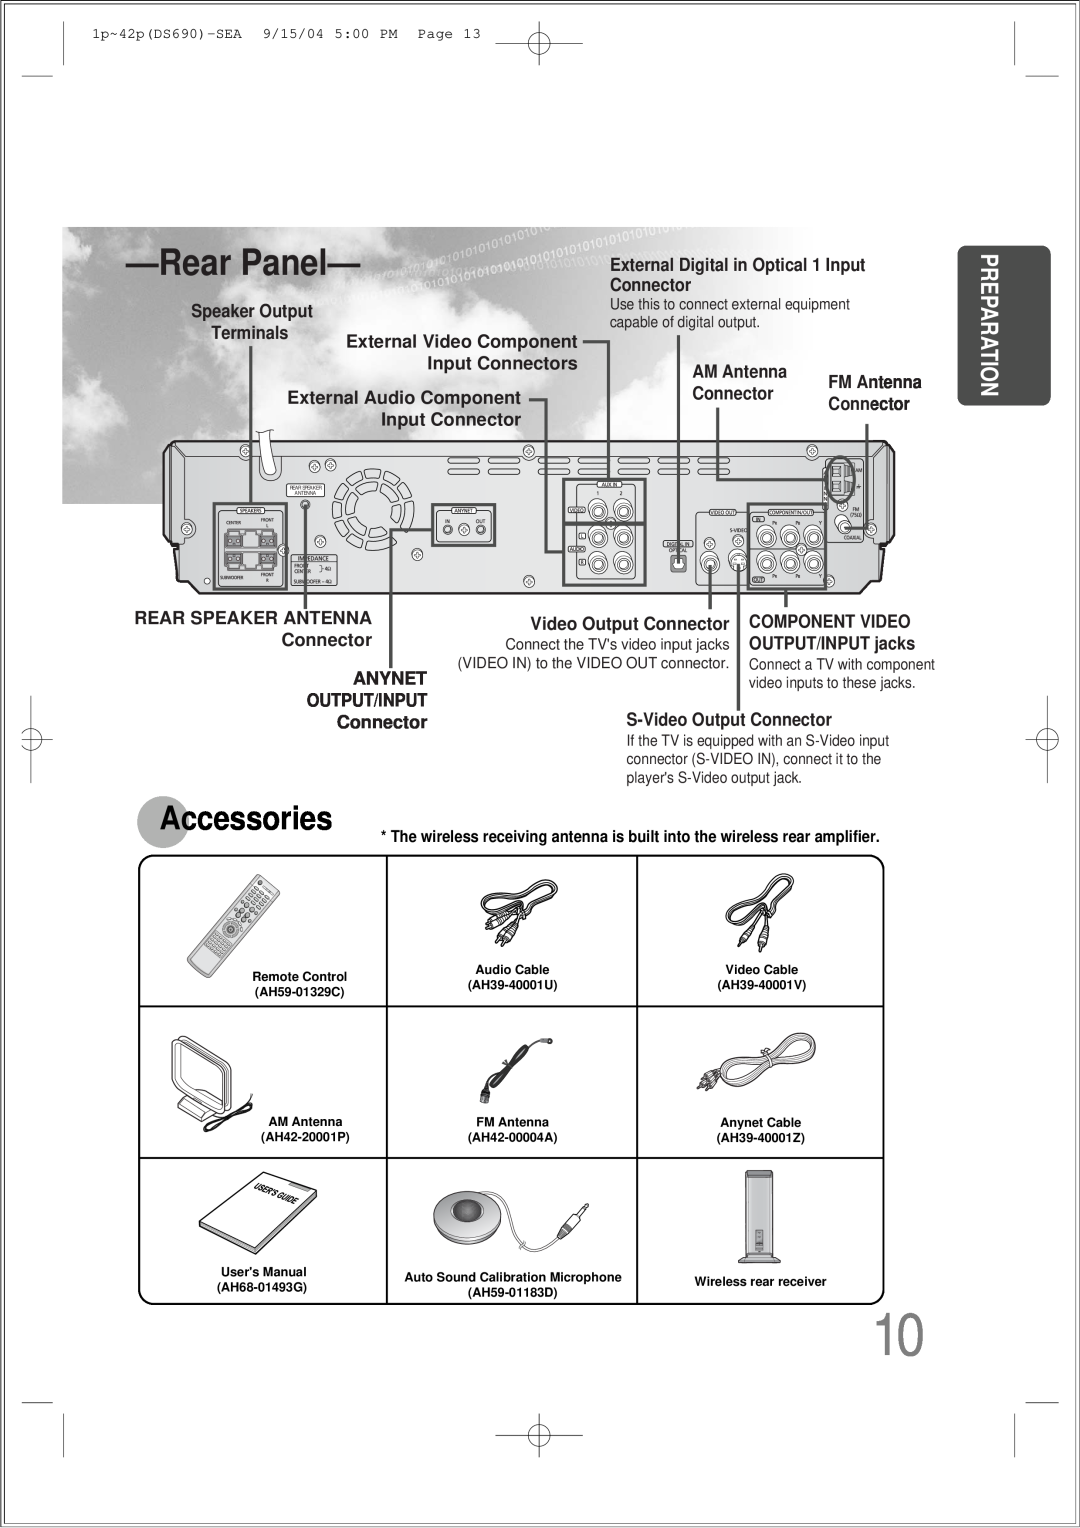 Samsung HT-DS690 instruction manual RearPanel, Accessories 